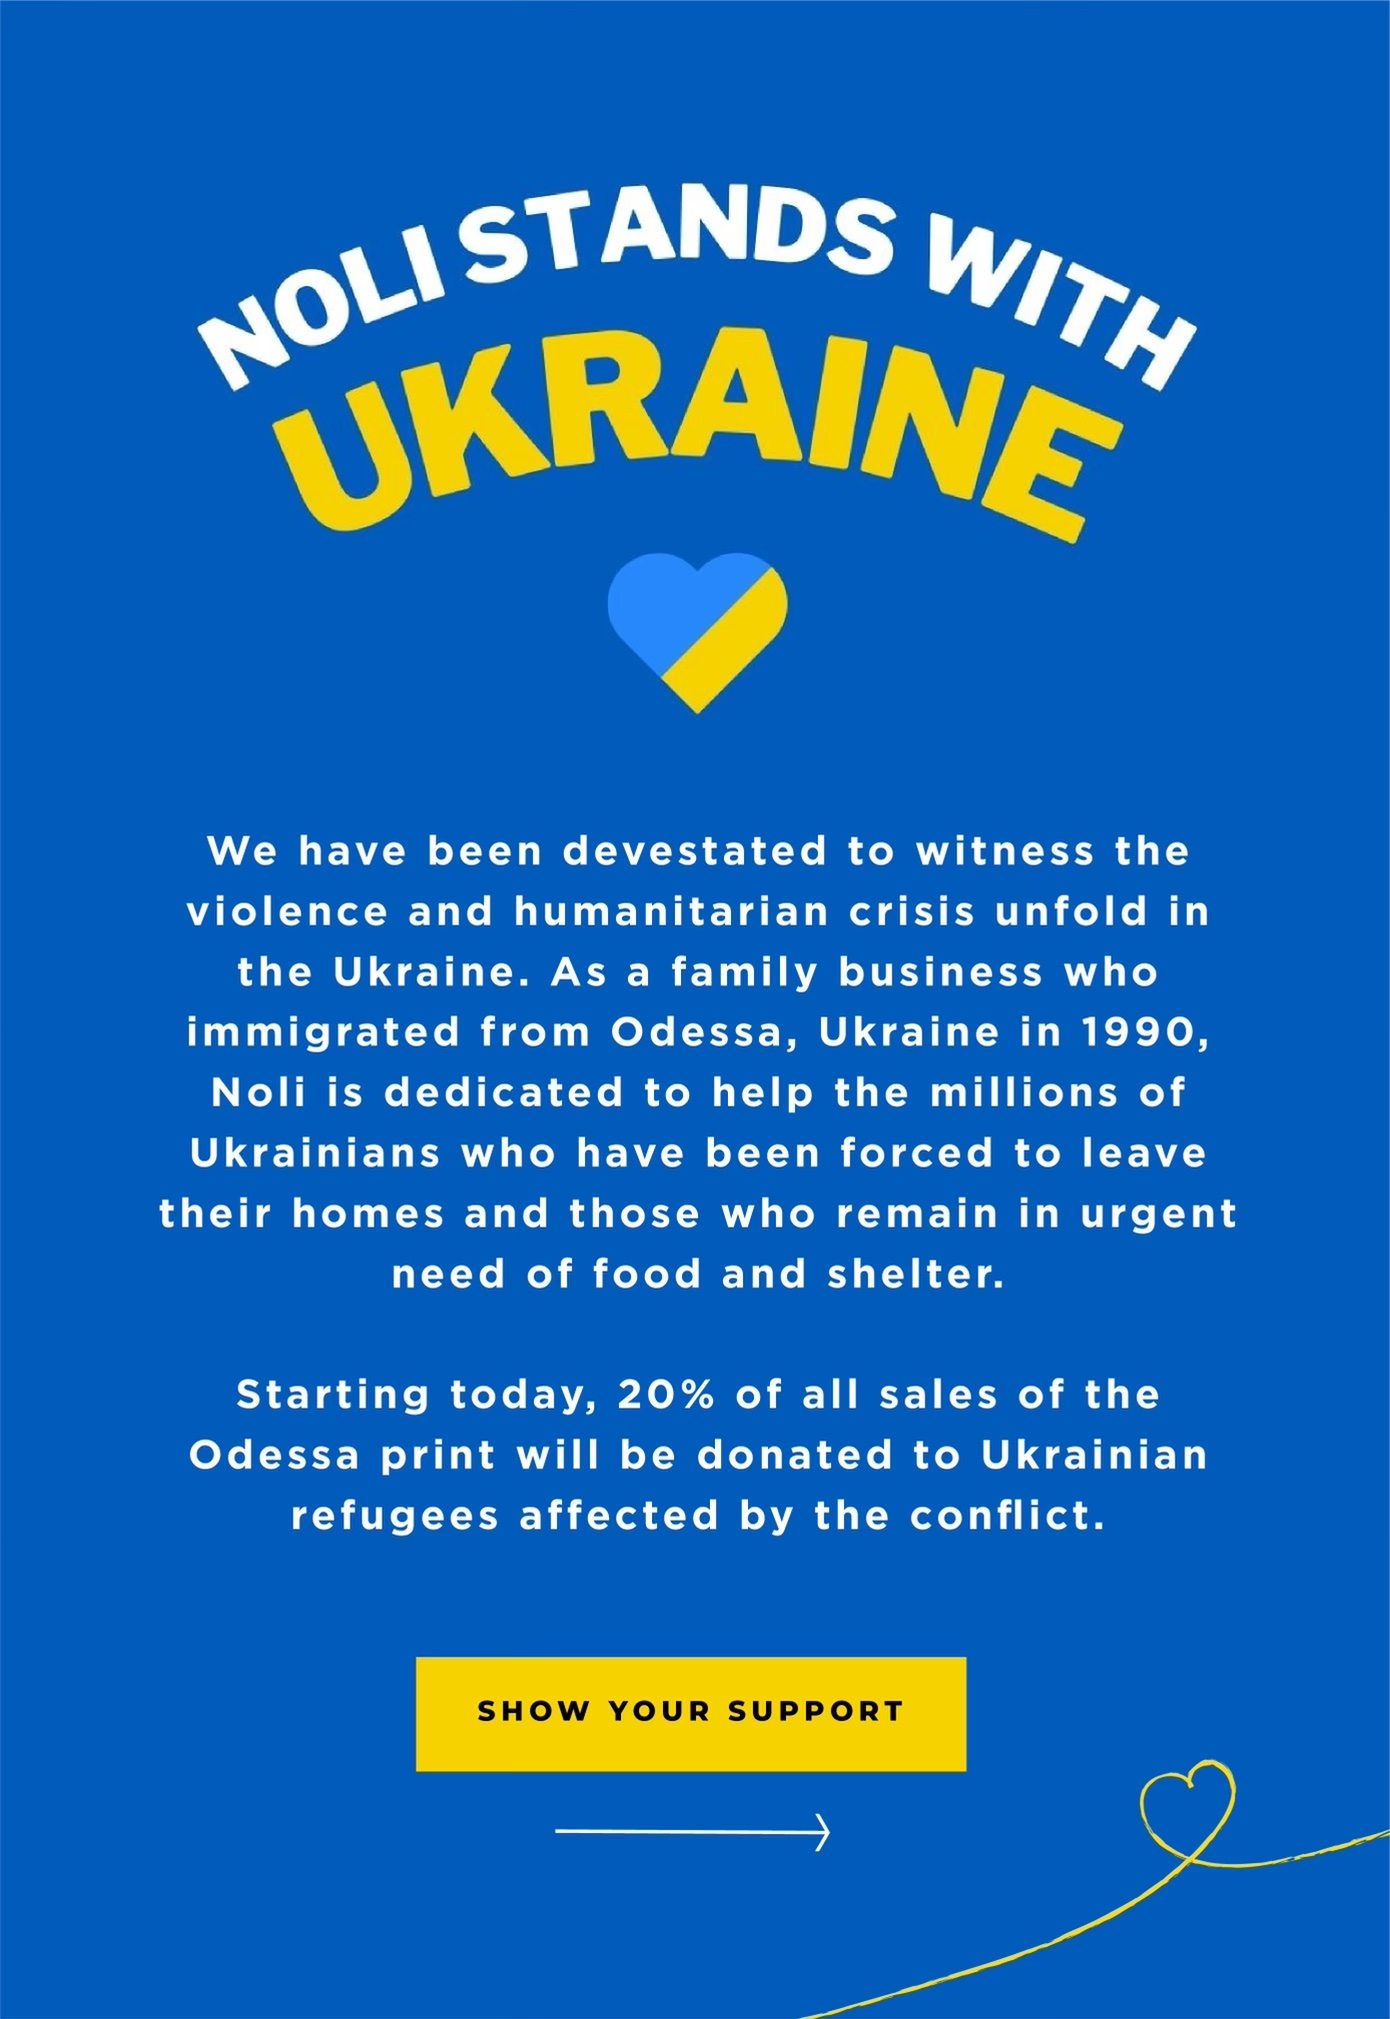 Noli stands with Ukraine. We have ben devastated to witness the violence and humanitarian crisis unfold in the Ukraine. 20% of sales from this print will be donated to Ukraine.